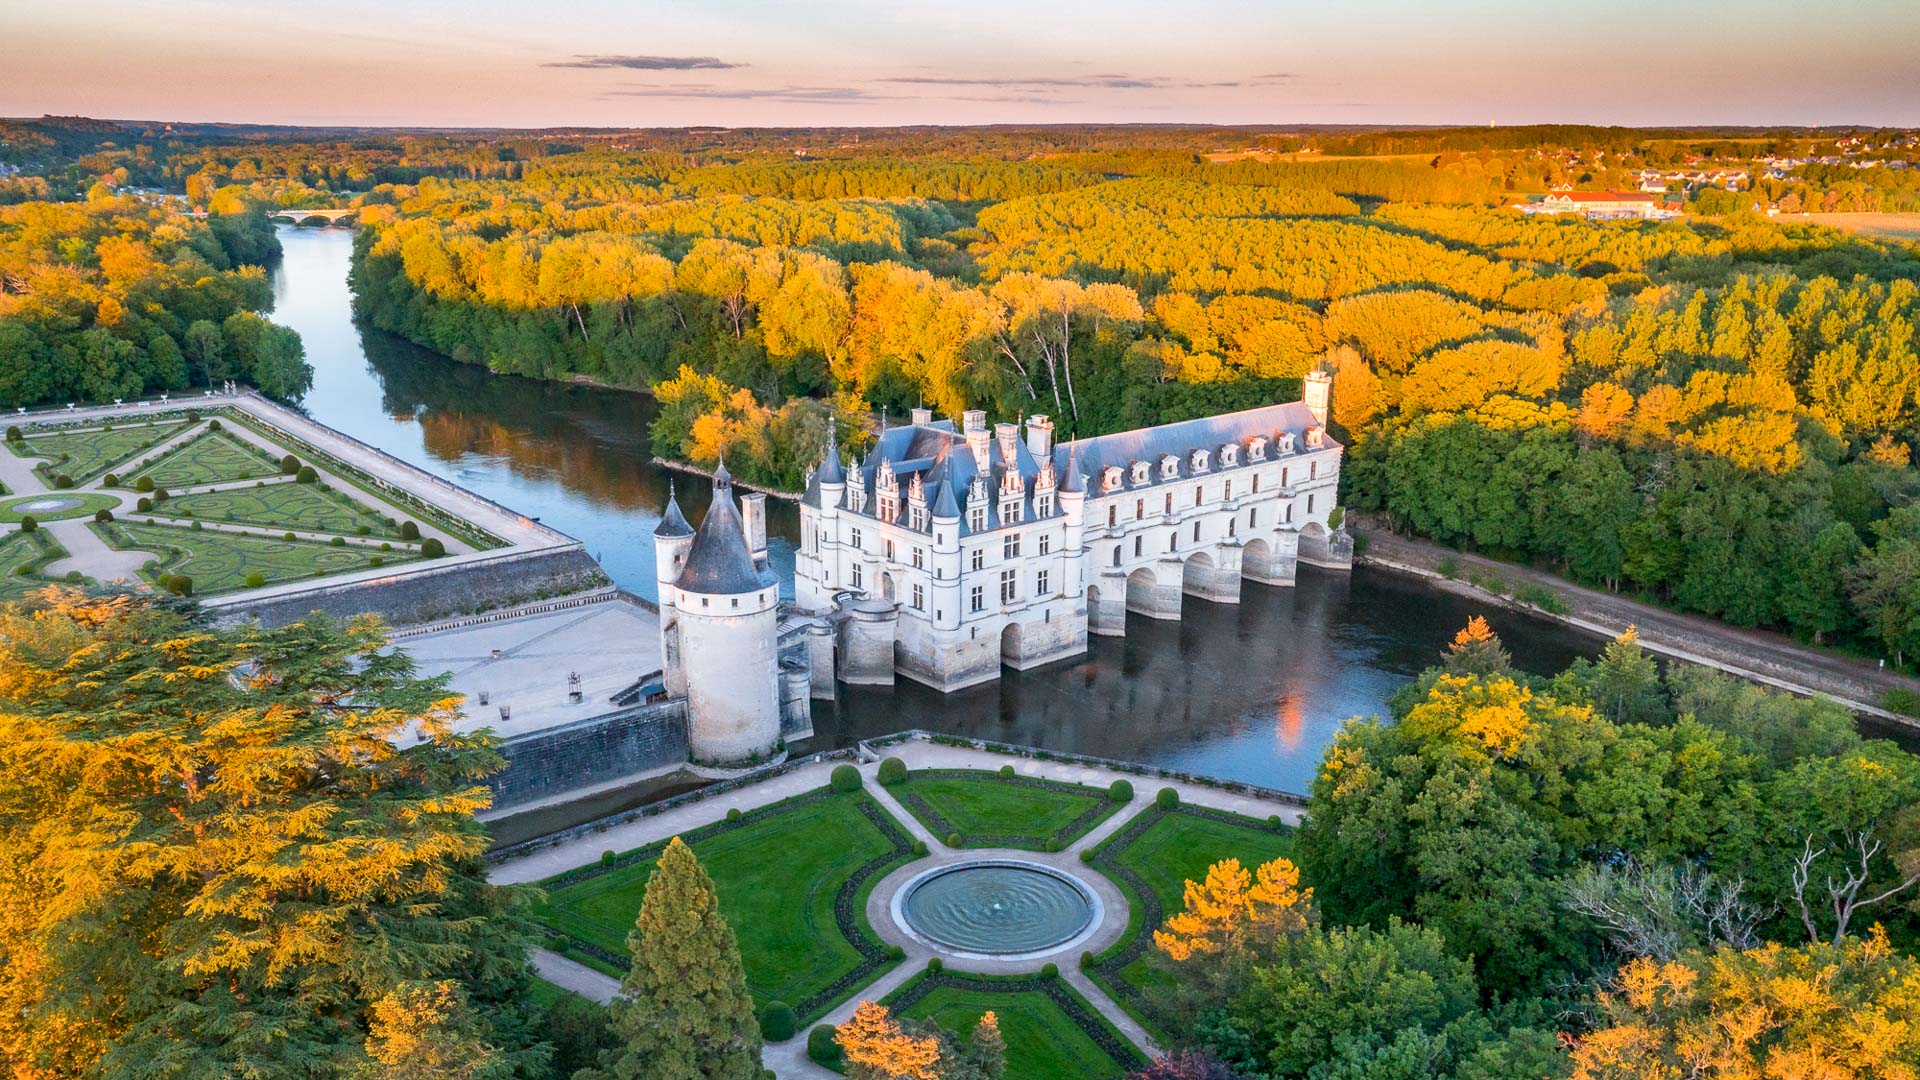 loire valley chateaux: amboise, chenonceau, chinon / french chateaux